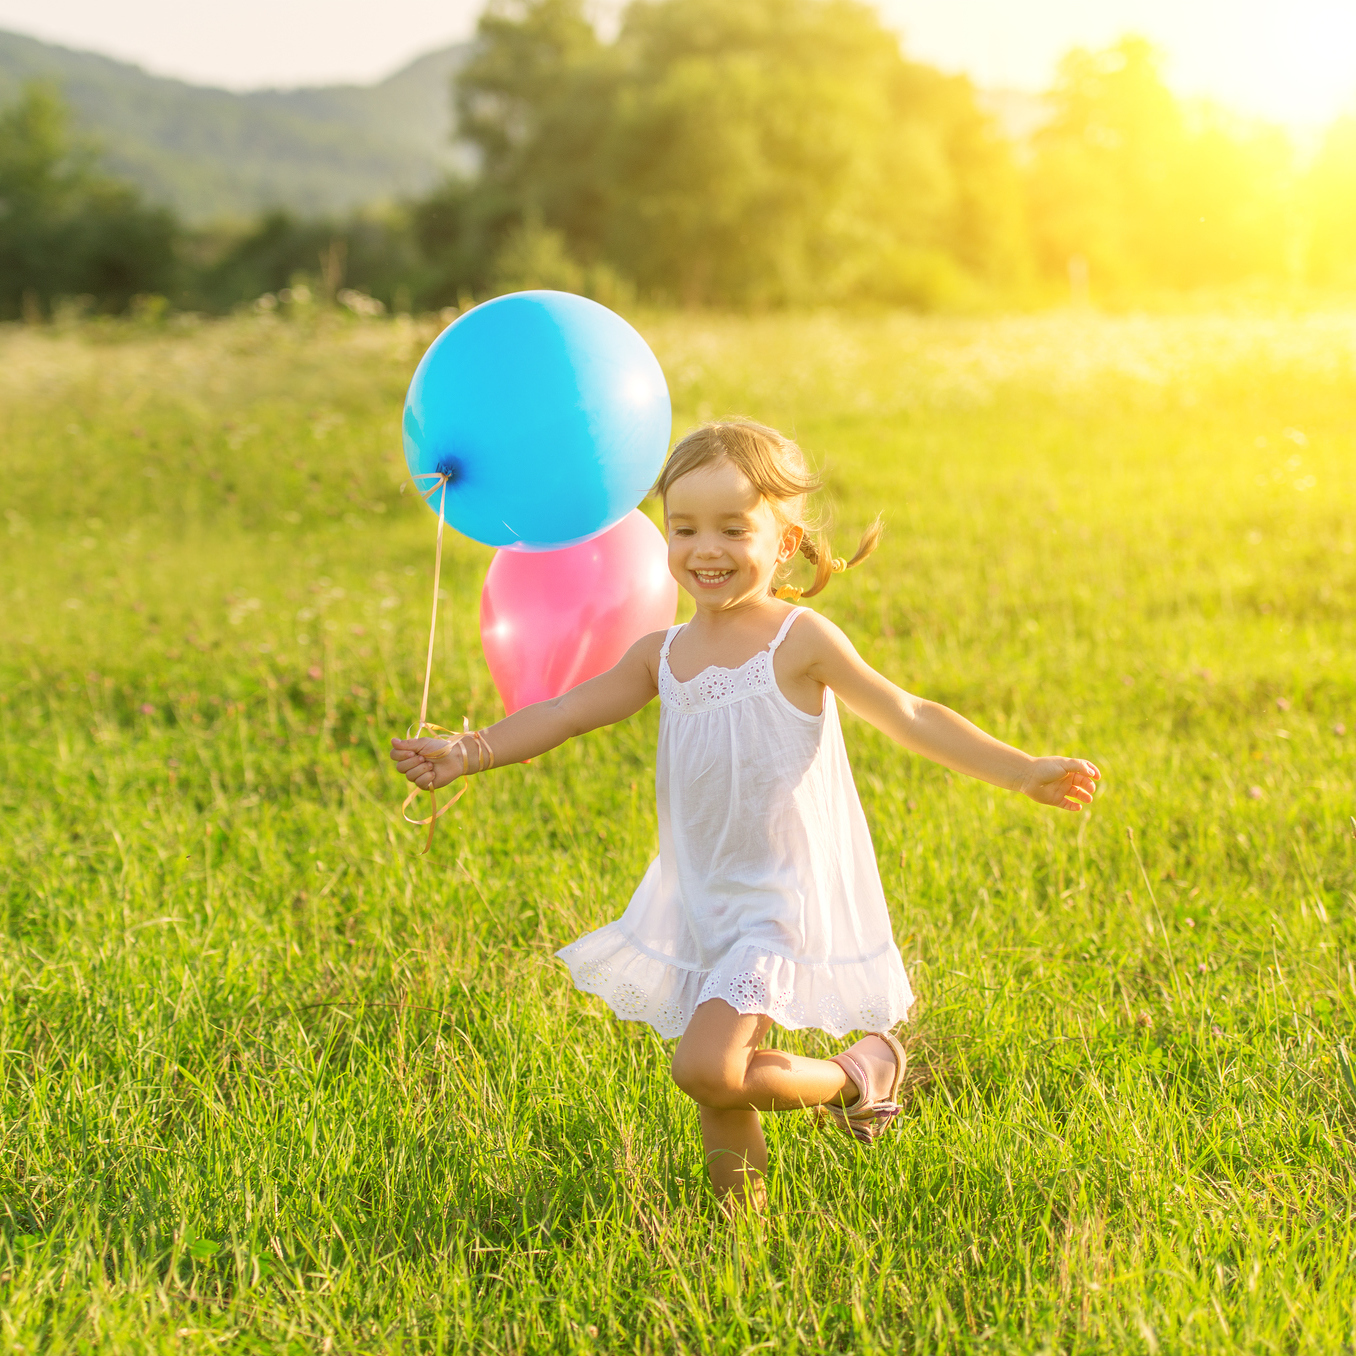 young girl laughing and running through a field with balloons